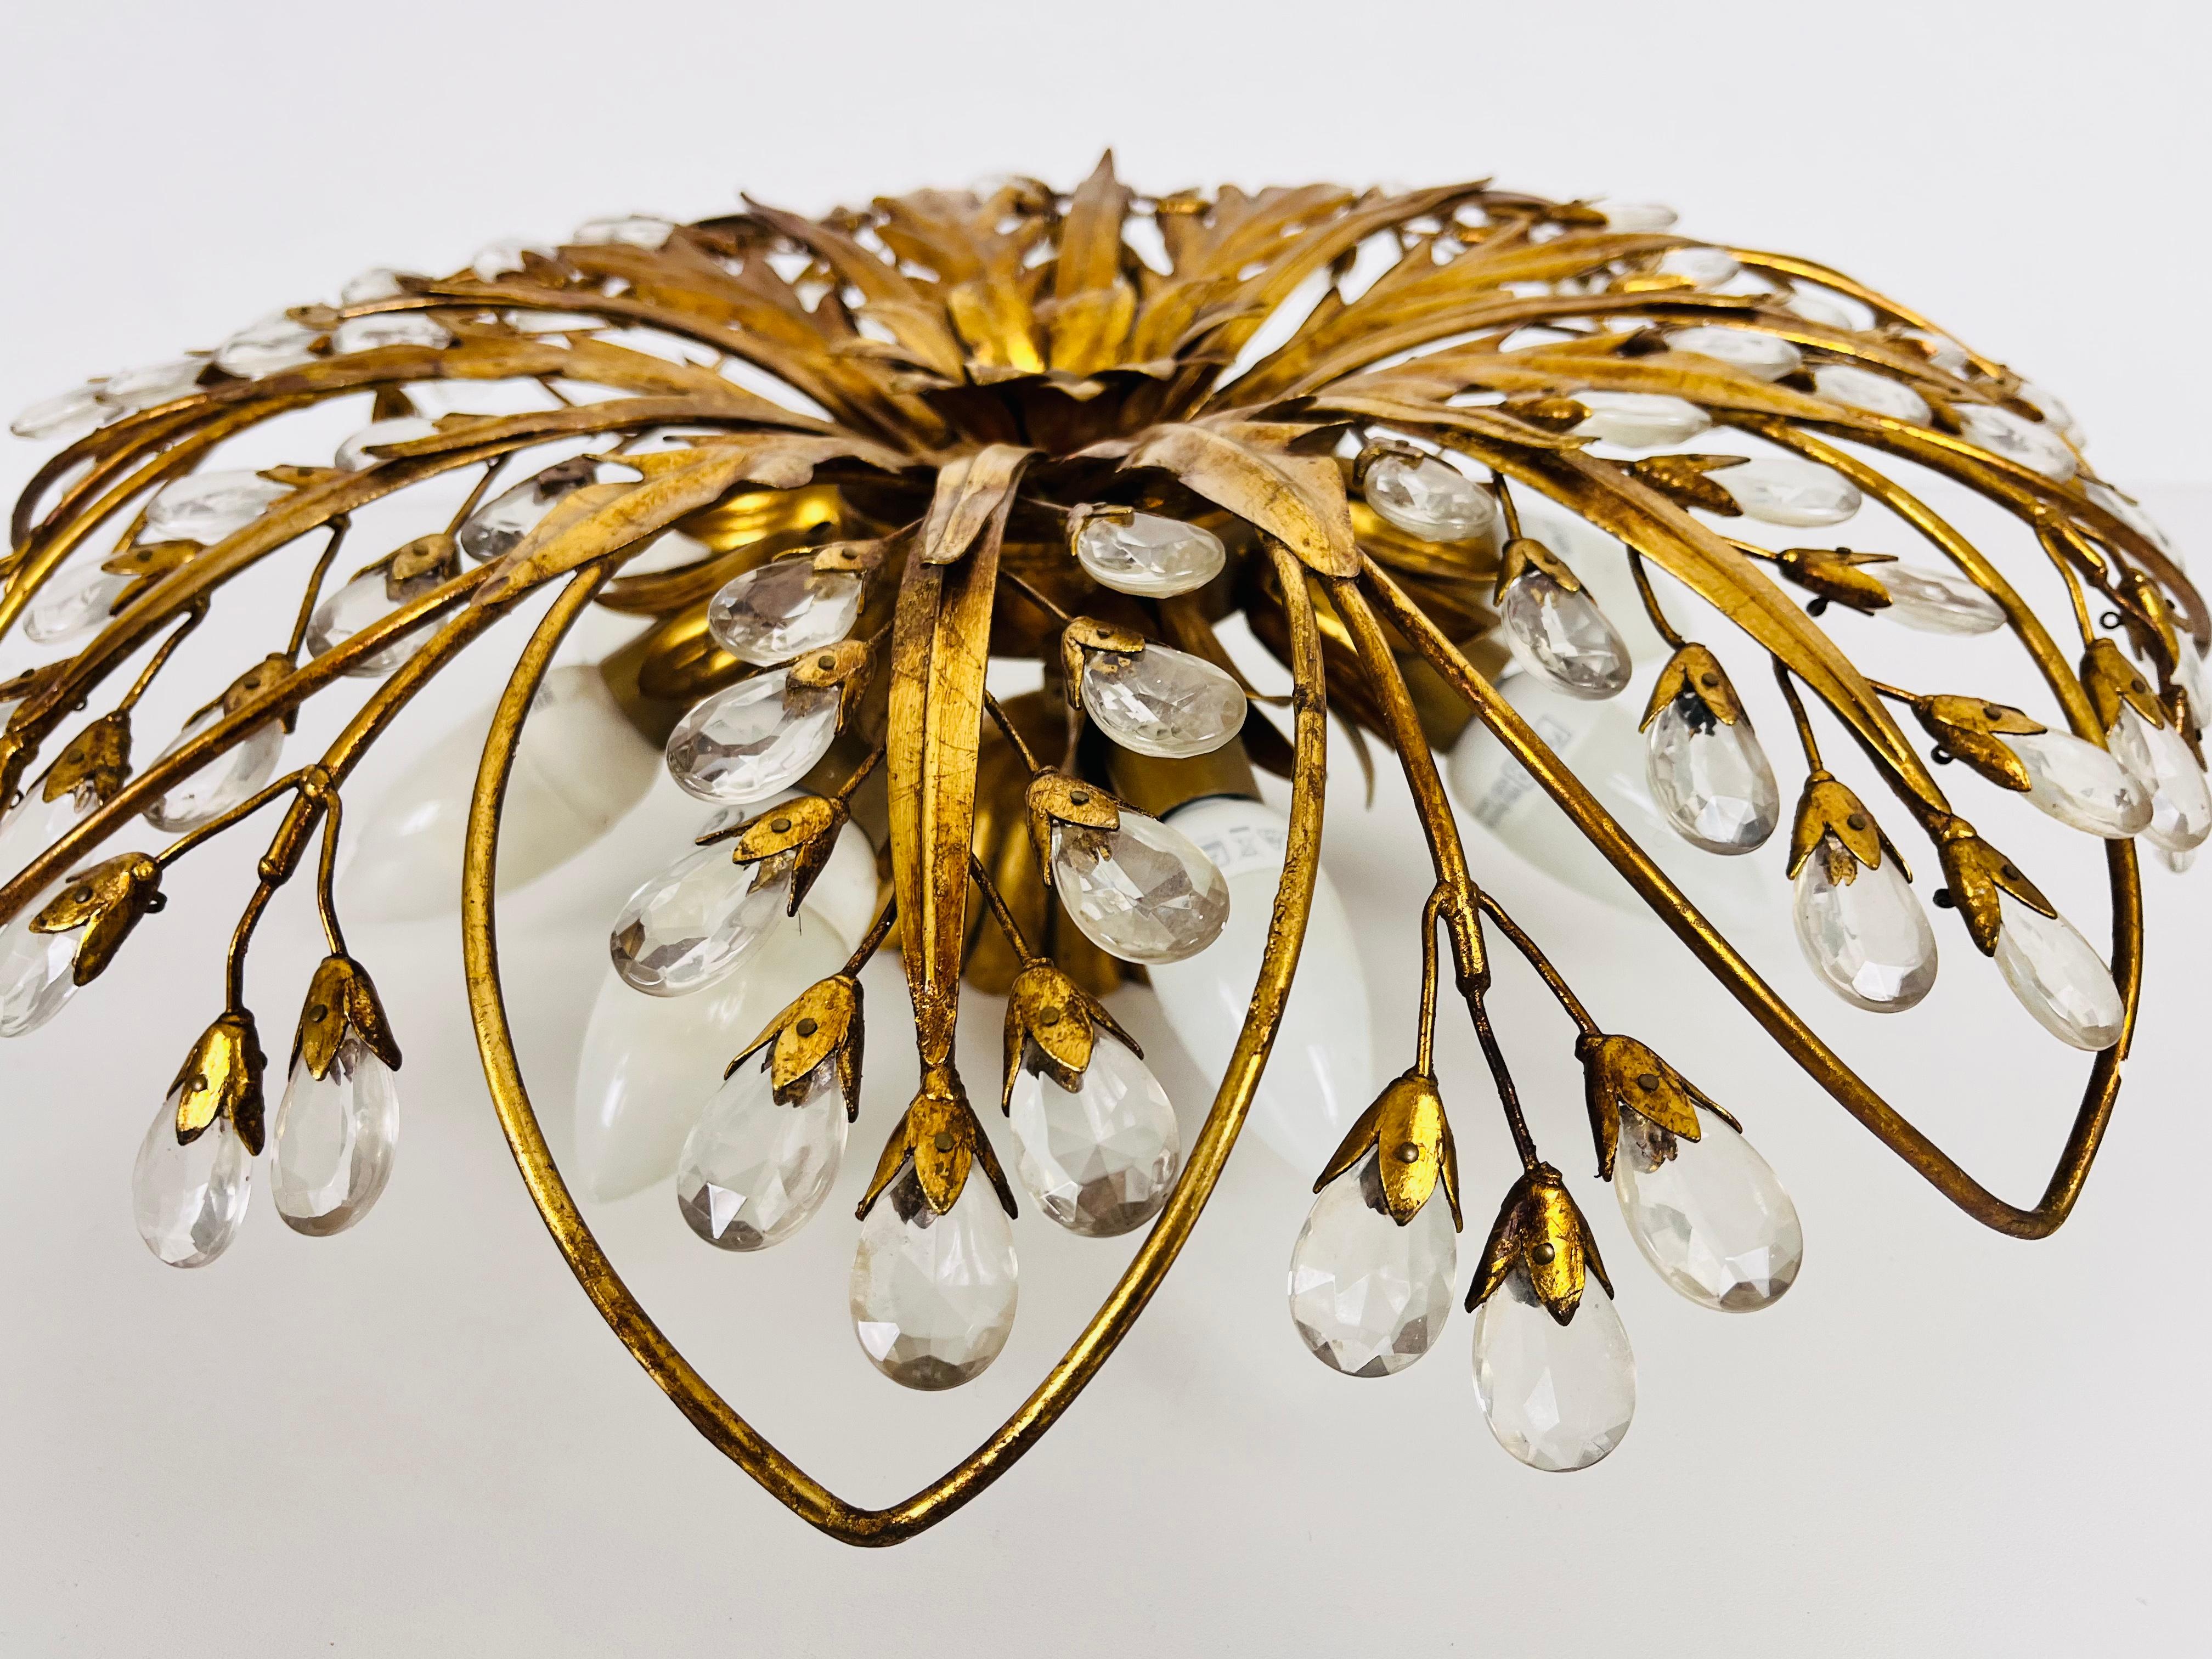 Hand-Crafted Golden Florentine Flower Shape Flushmount by Banci Firenze, 1970s For Sale